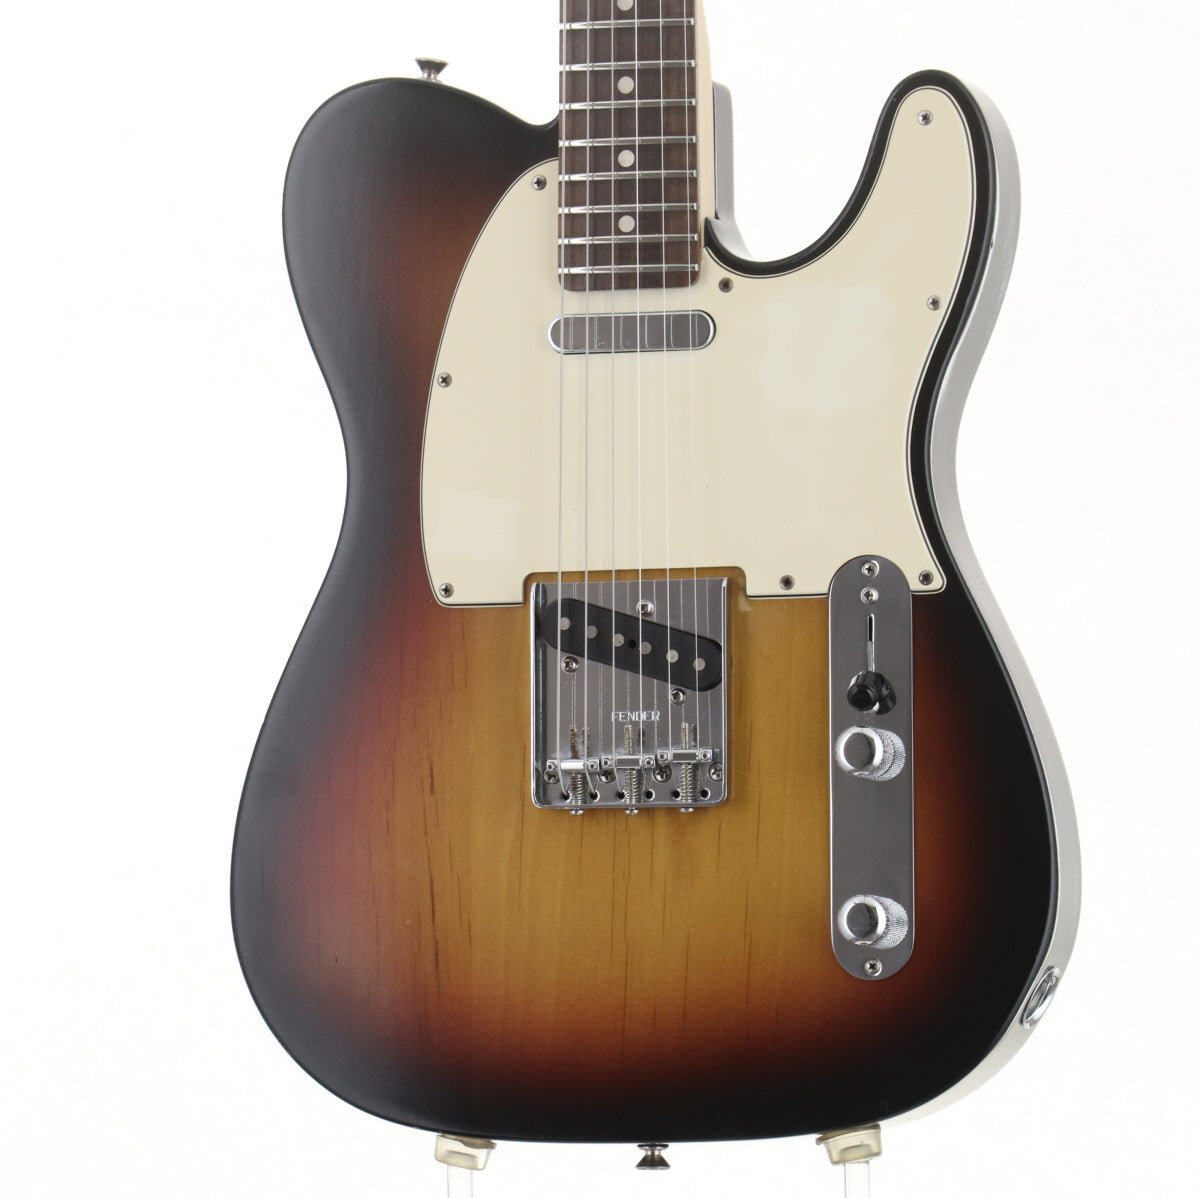 Fender Telecaster USA highway one - 弦楽器、ギター